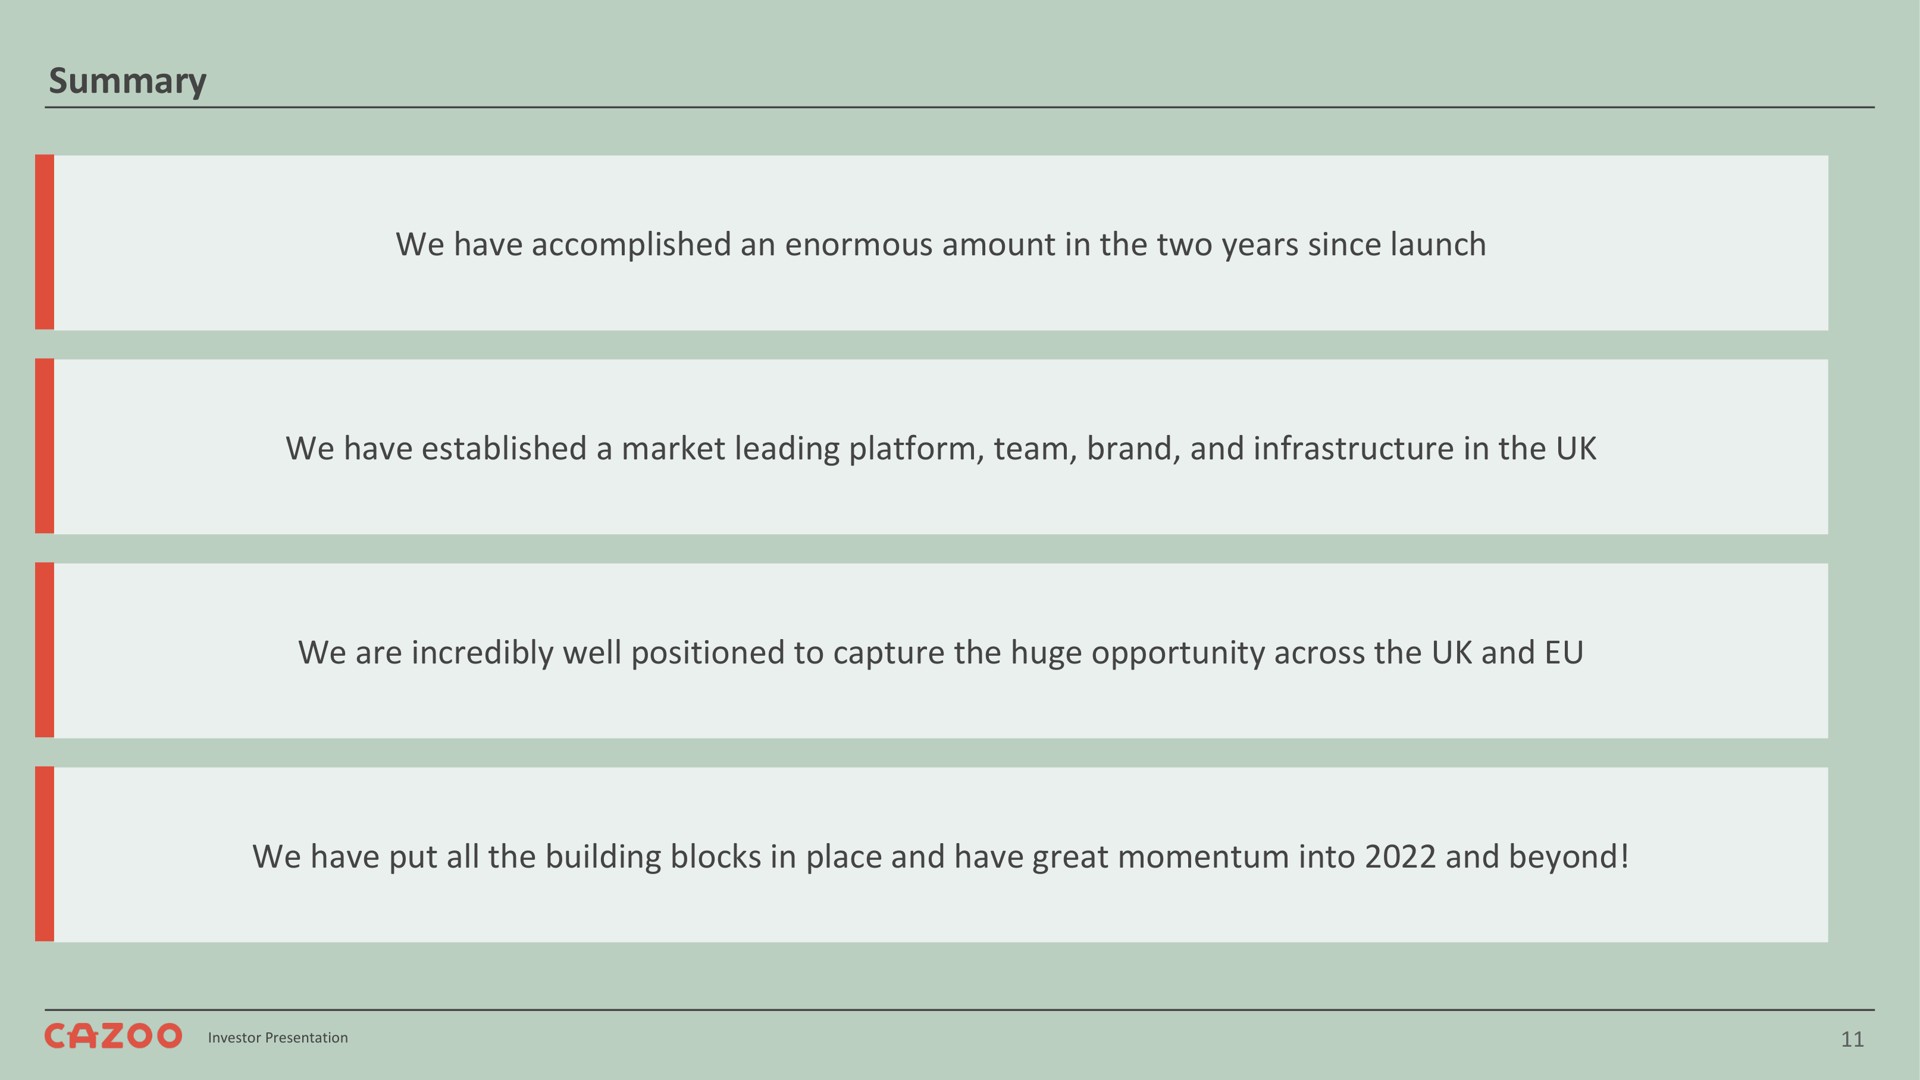 summary we have accomplished an enormous amount in the two years since launch we have established a market leading platform team brand and infrastructure in the we are incredibly well positioned to capture the huge opportunity across the and we have put all the building blocks in place and have great momentum into and beyond | Cazoo